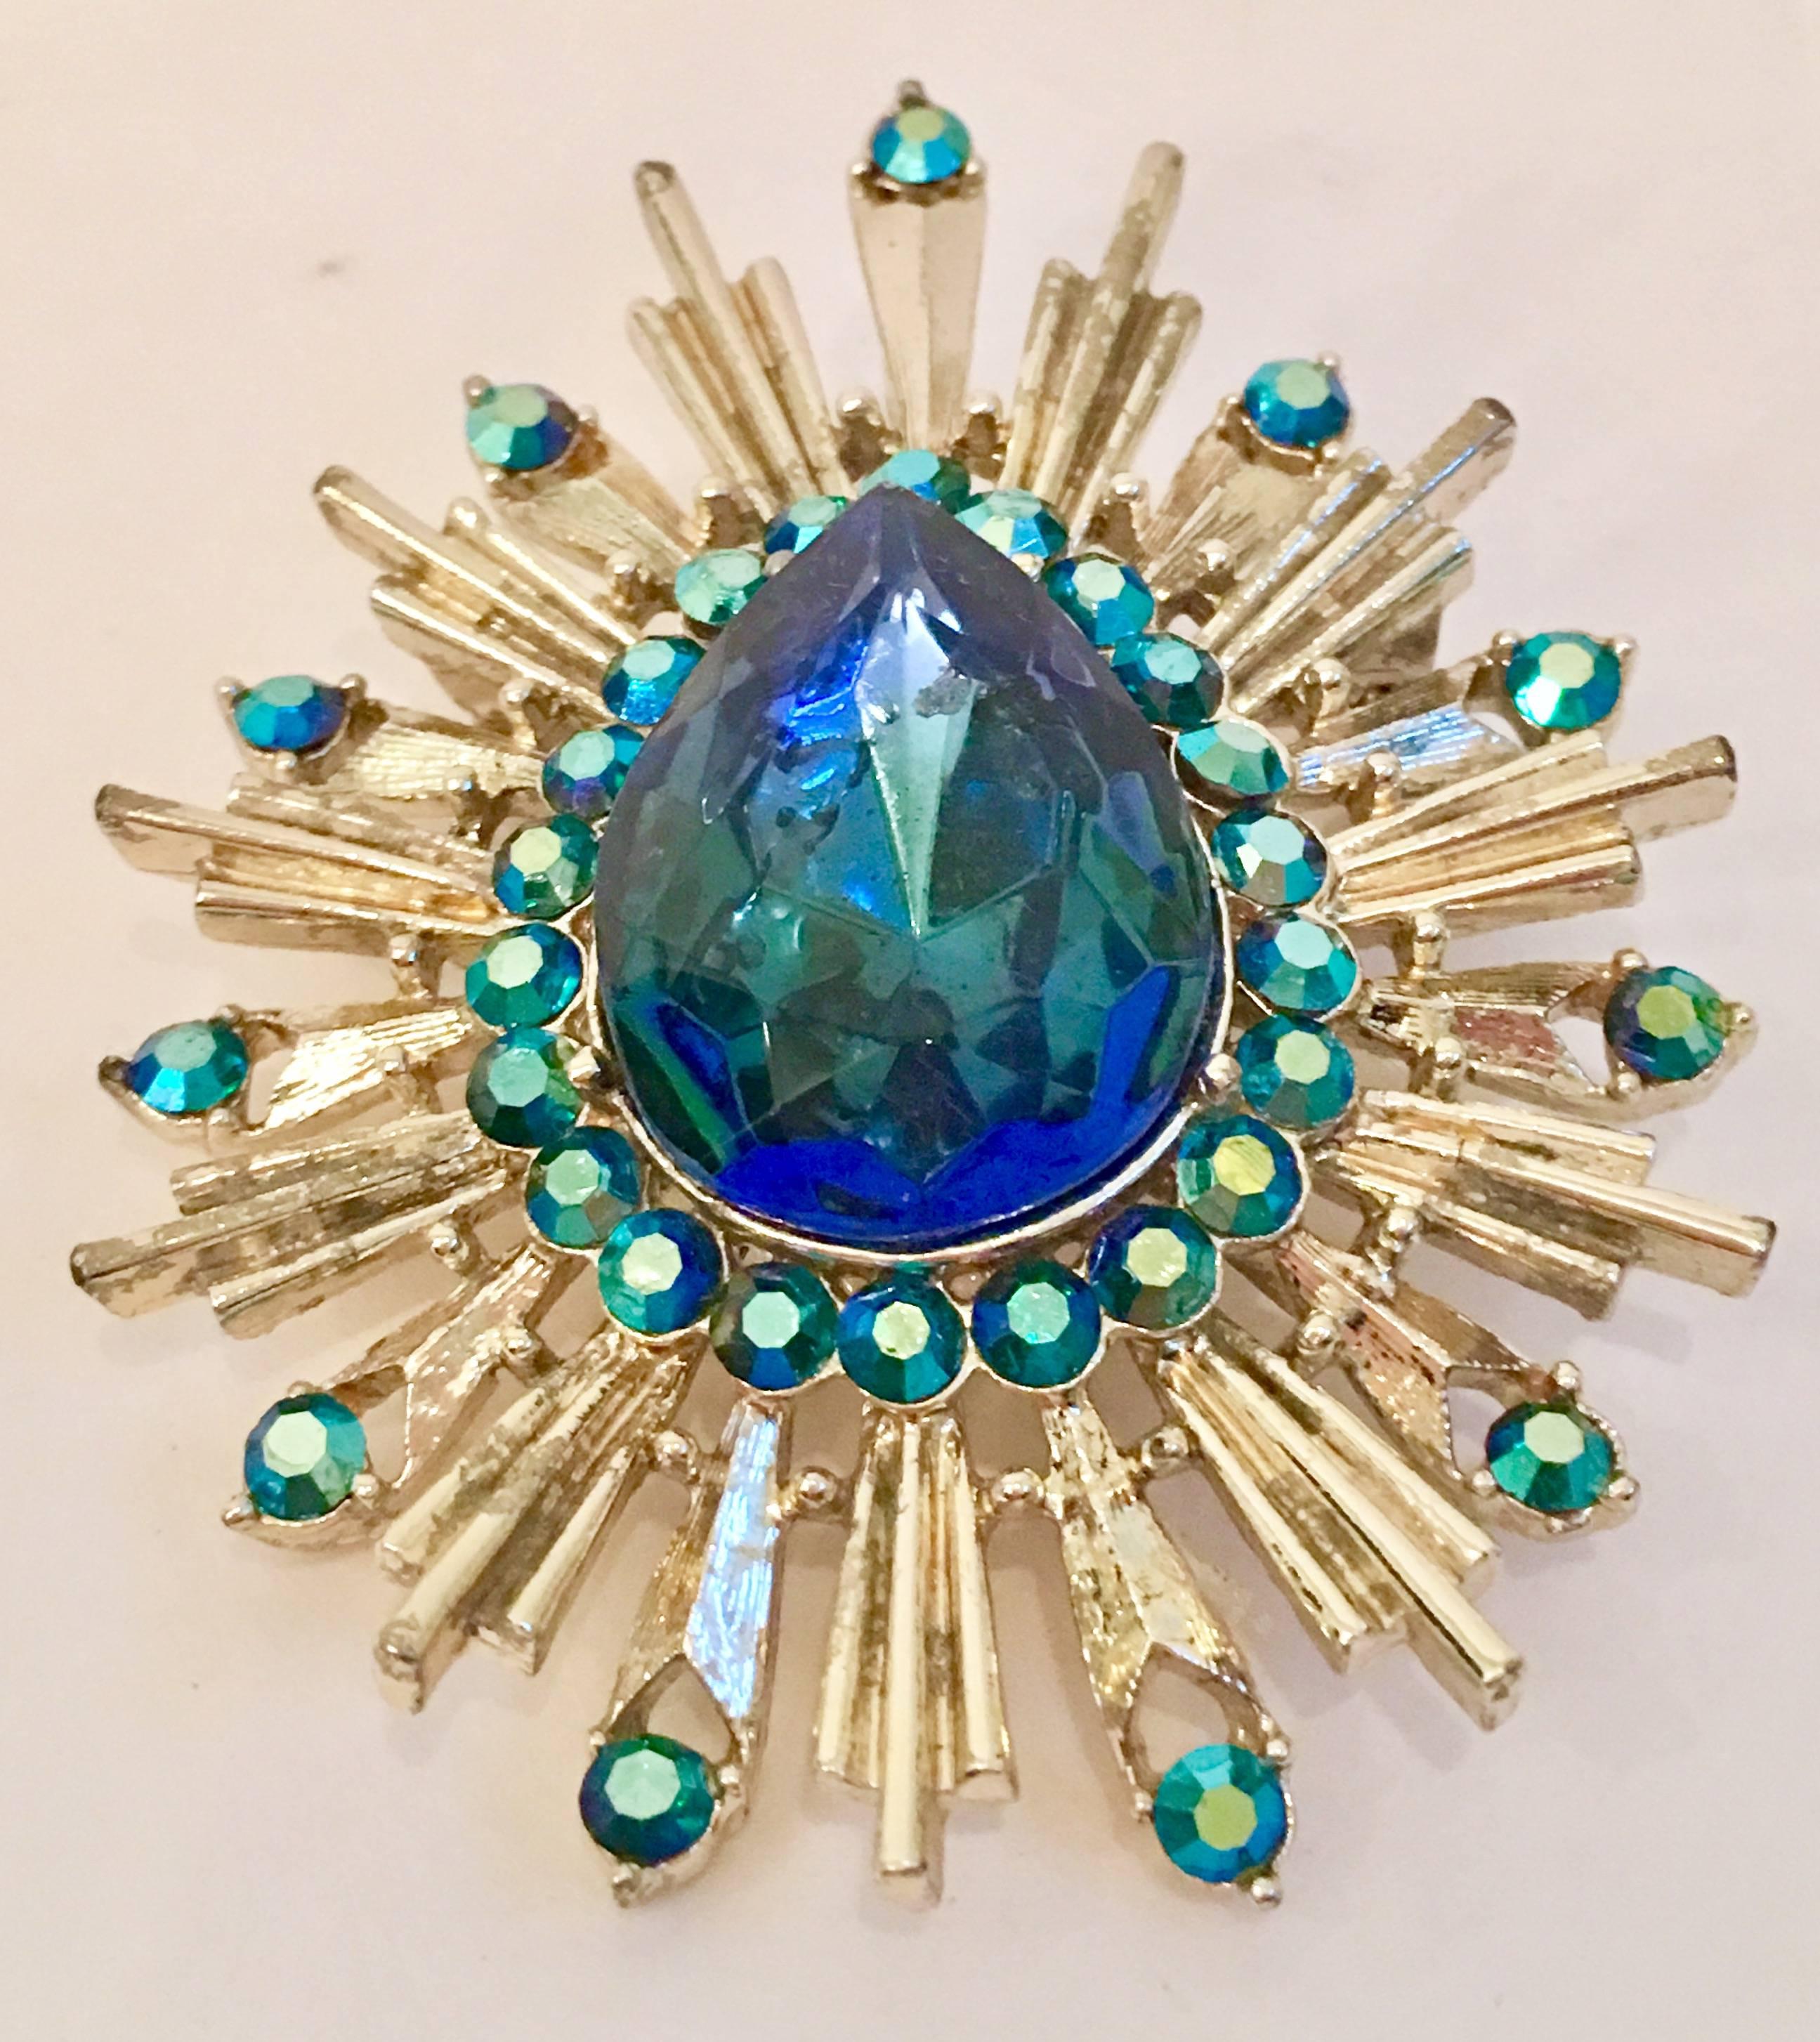 20th Century Large Starburst Convertible Brooch & Necklace Slide. Features gold tone plated metal and Austrian crystal rhinestone. Features one large central faceted blue sapphire stone approximately, 1